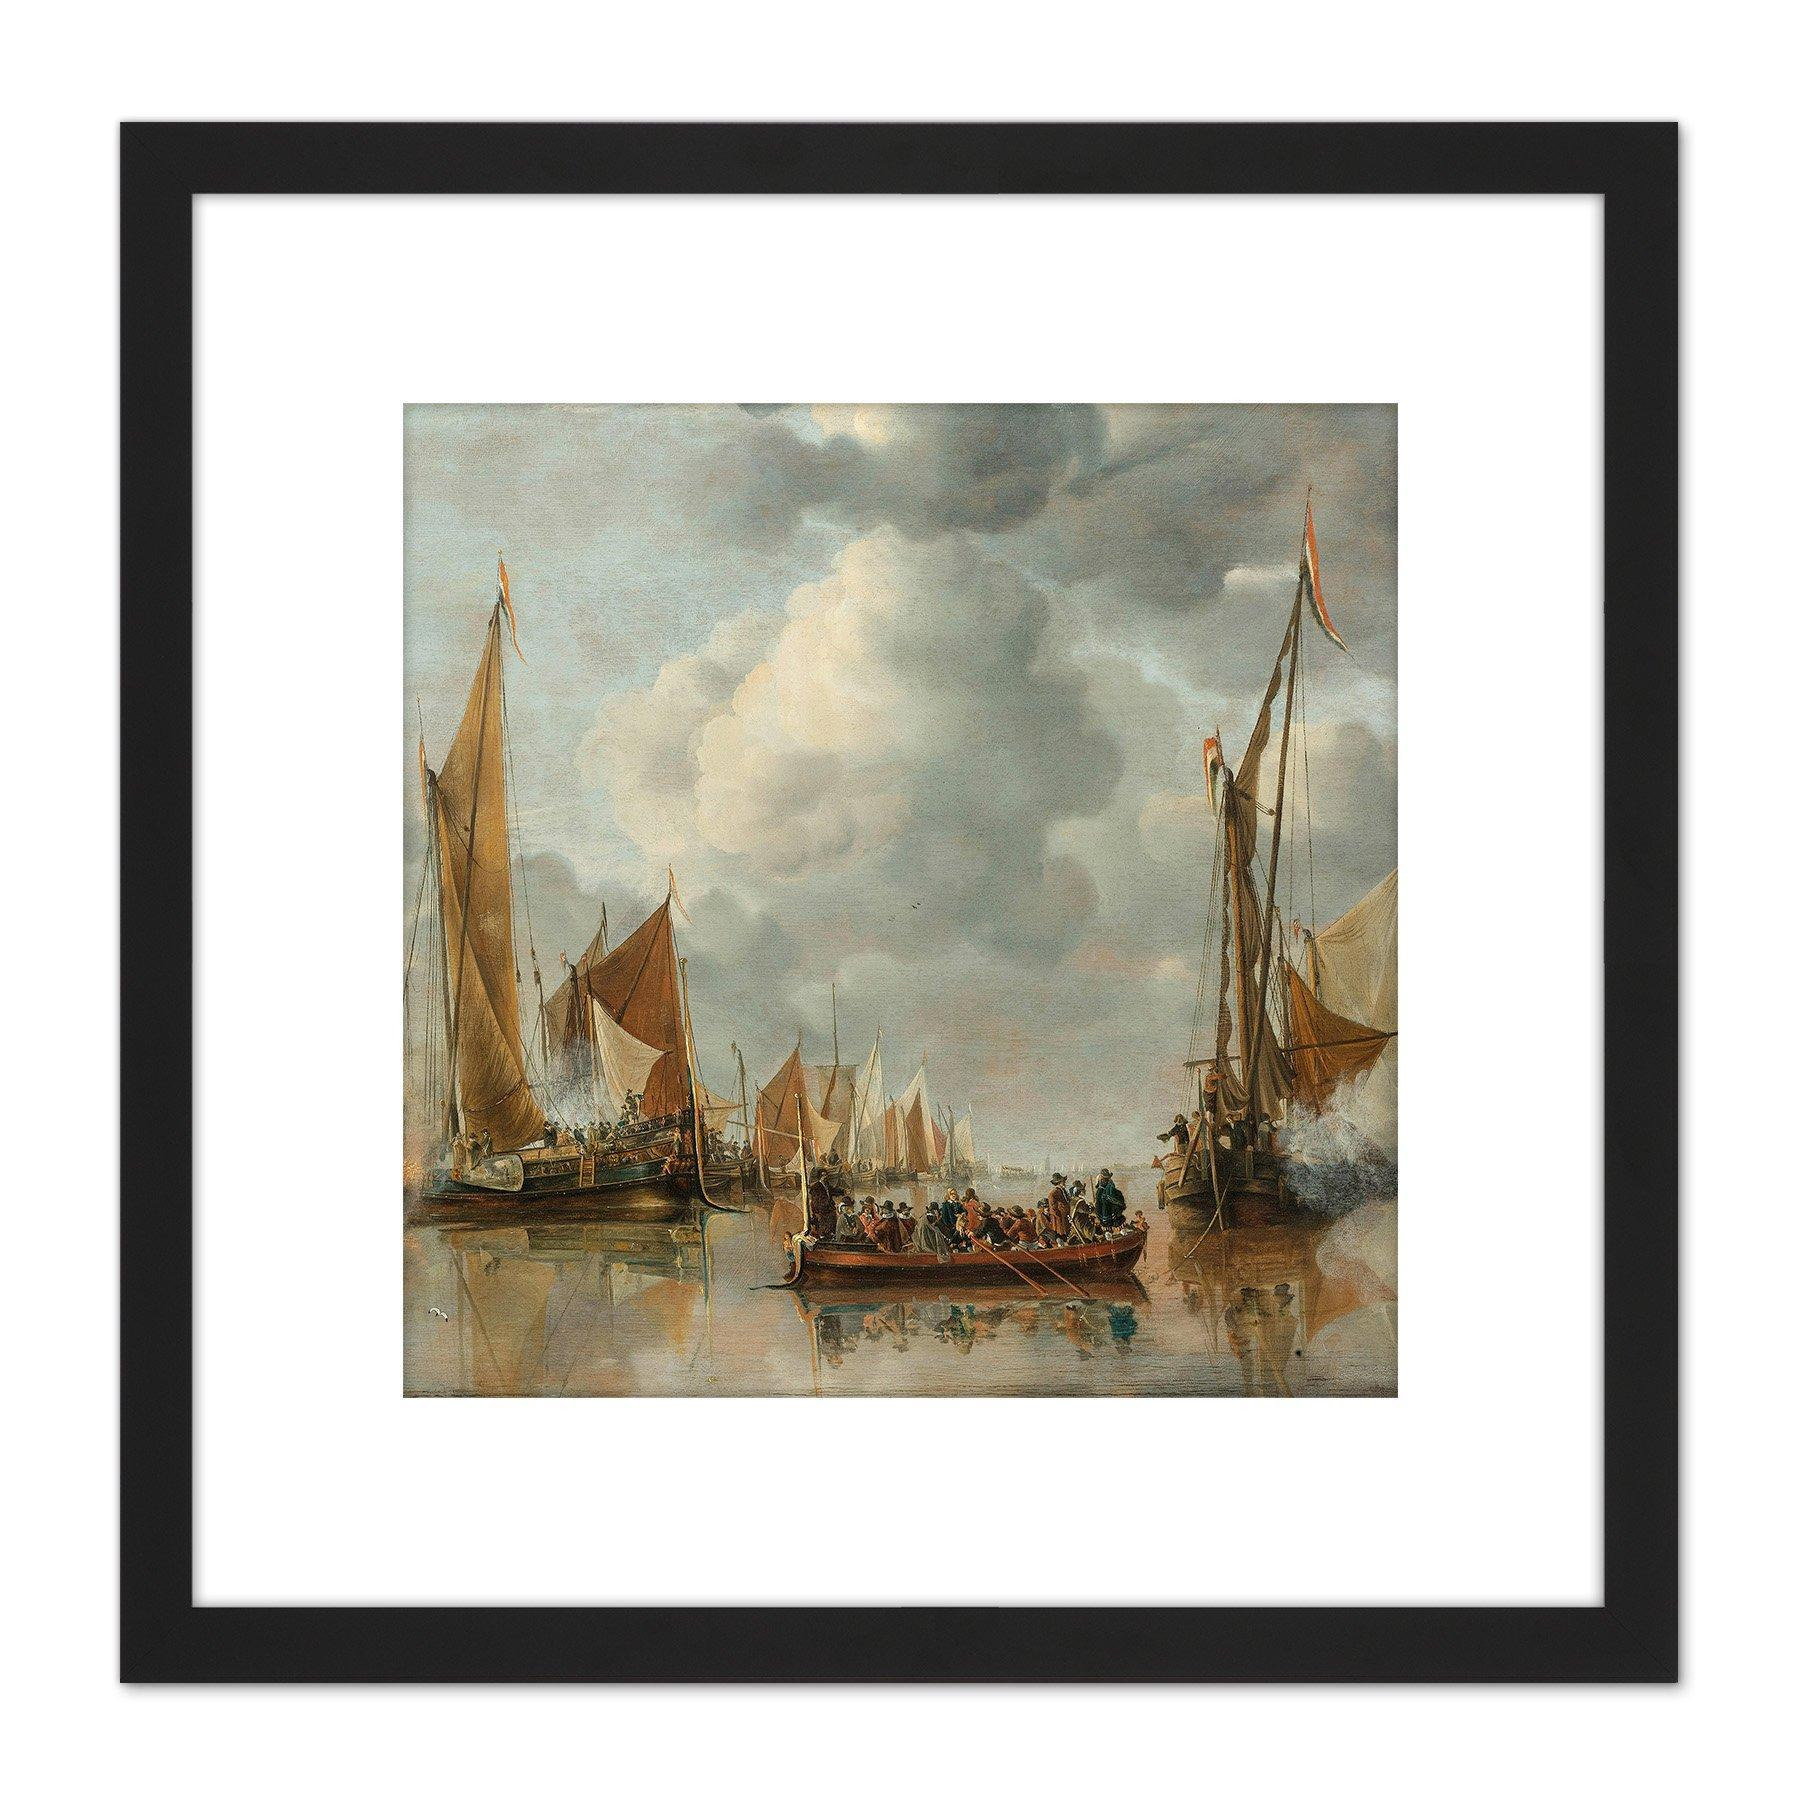 Van De Cappelle Fleet Saluting State Barge 8X8 Inch Square Wooden Framed Wall Art Print Picture with Mount - image 1